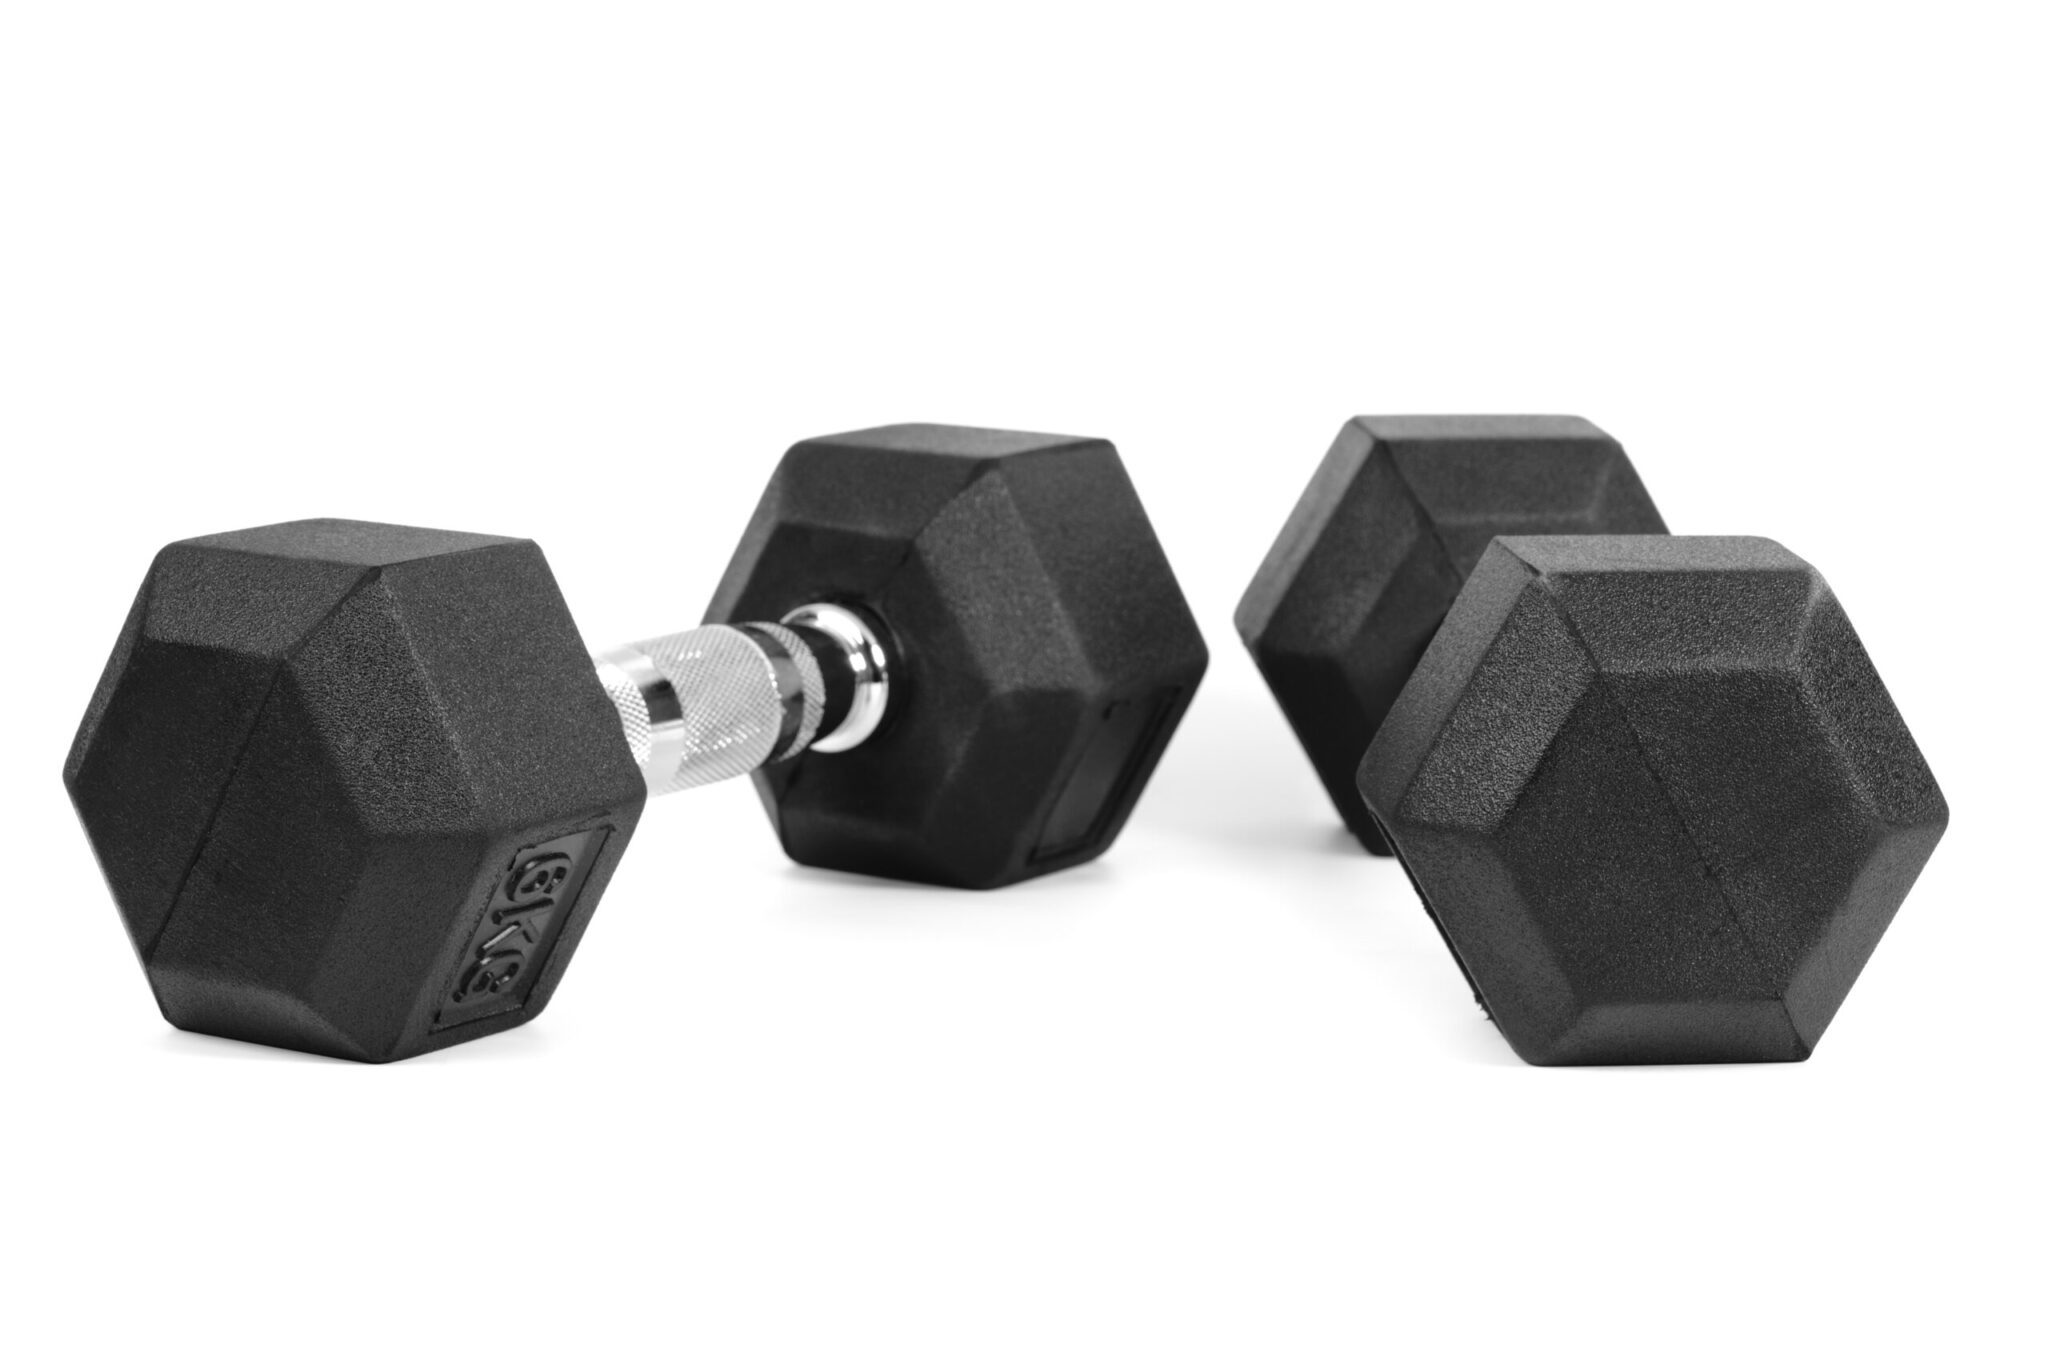 Local gym truself sporting club brand new dumbbell free weights